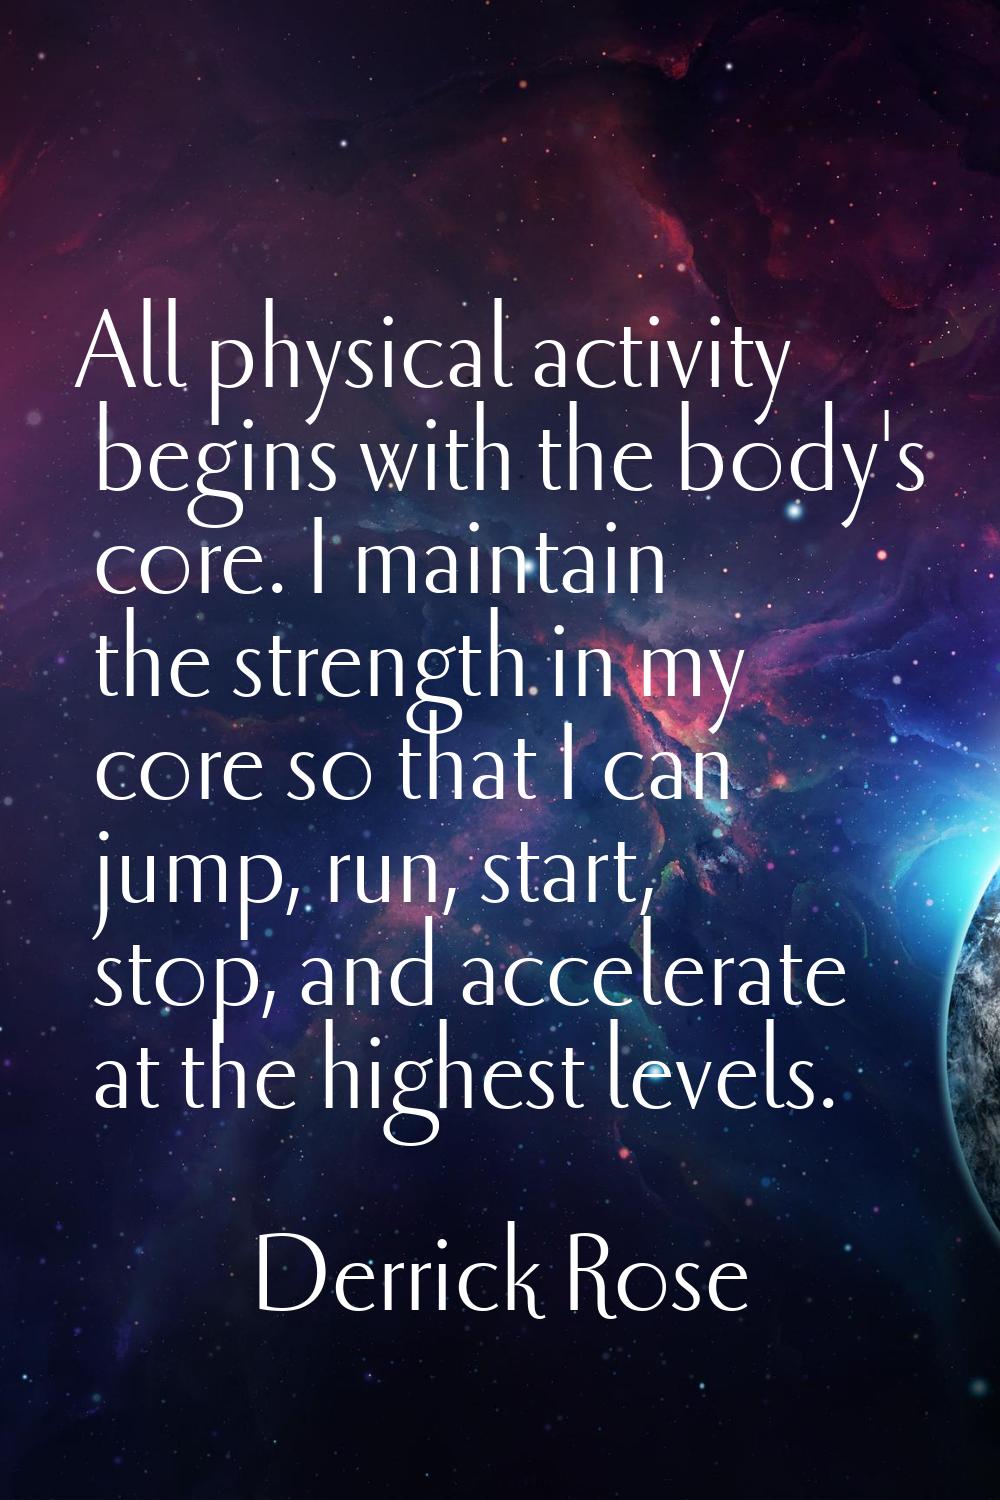 All physical activity begins with the body's core. I maintain the strength in my core so that I can